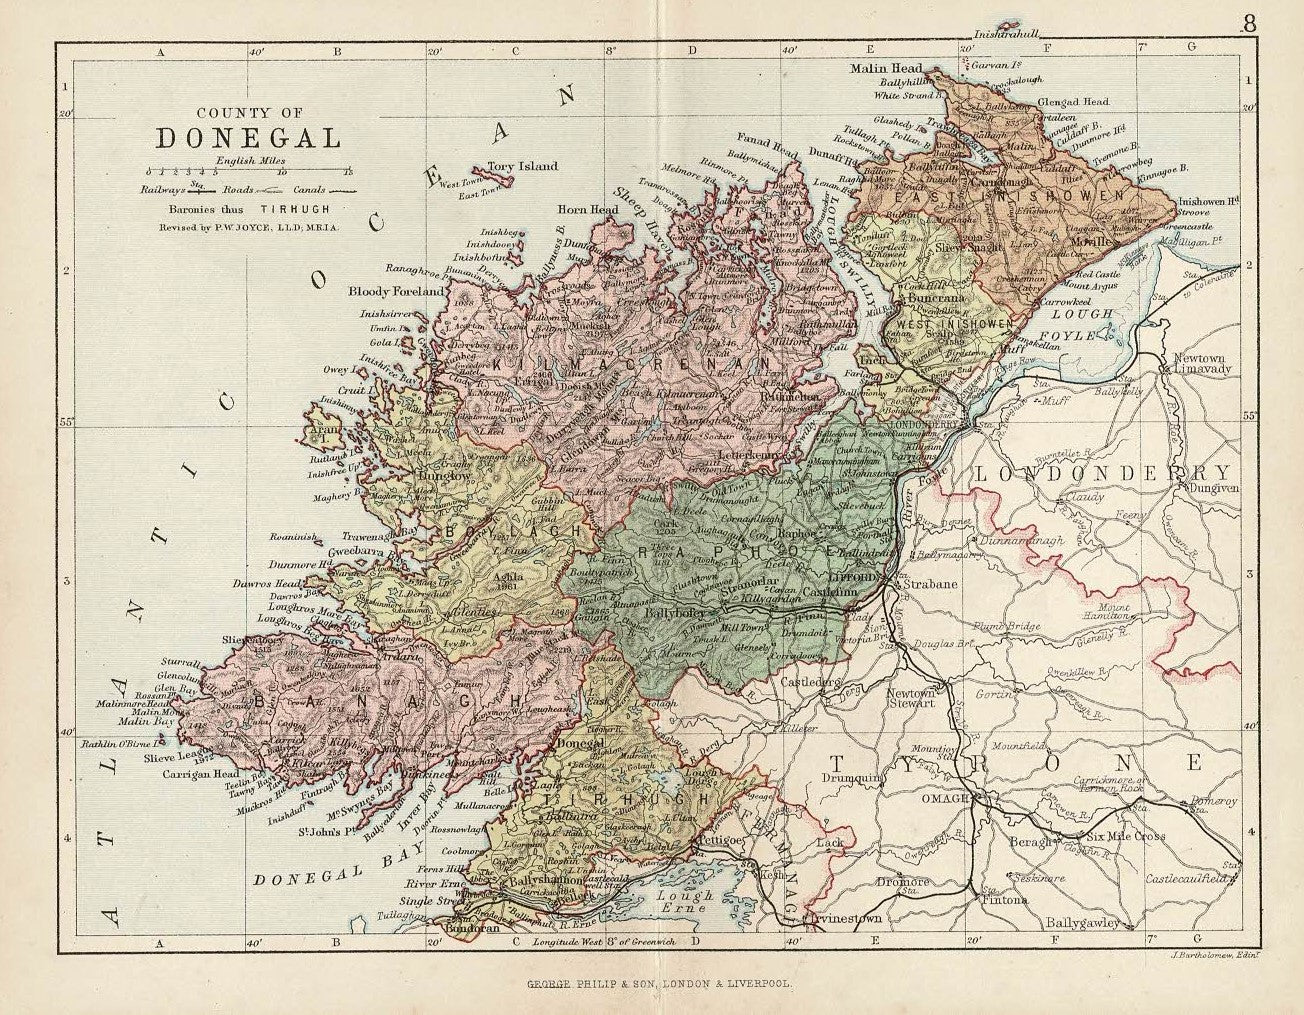 Donegal Ireland antique county map 1882